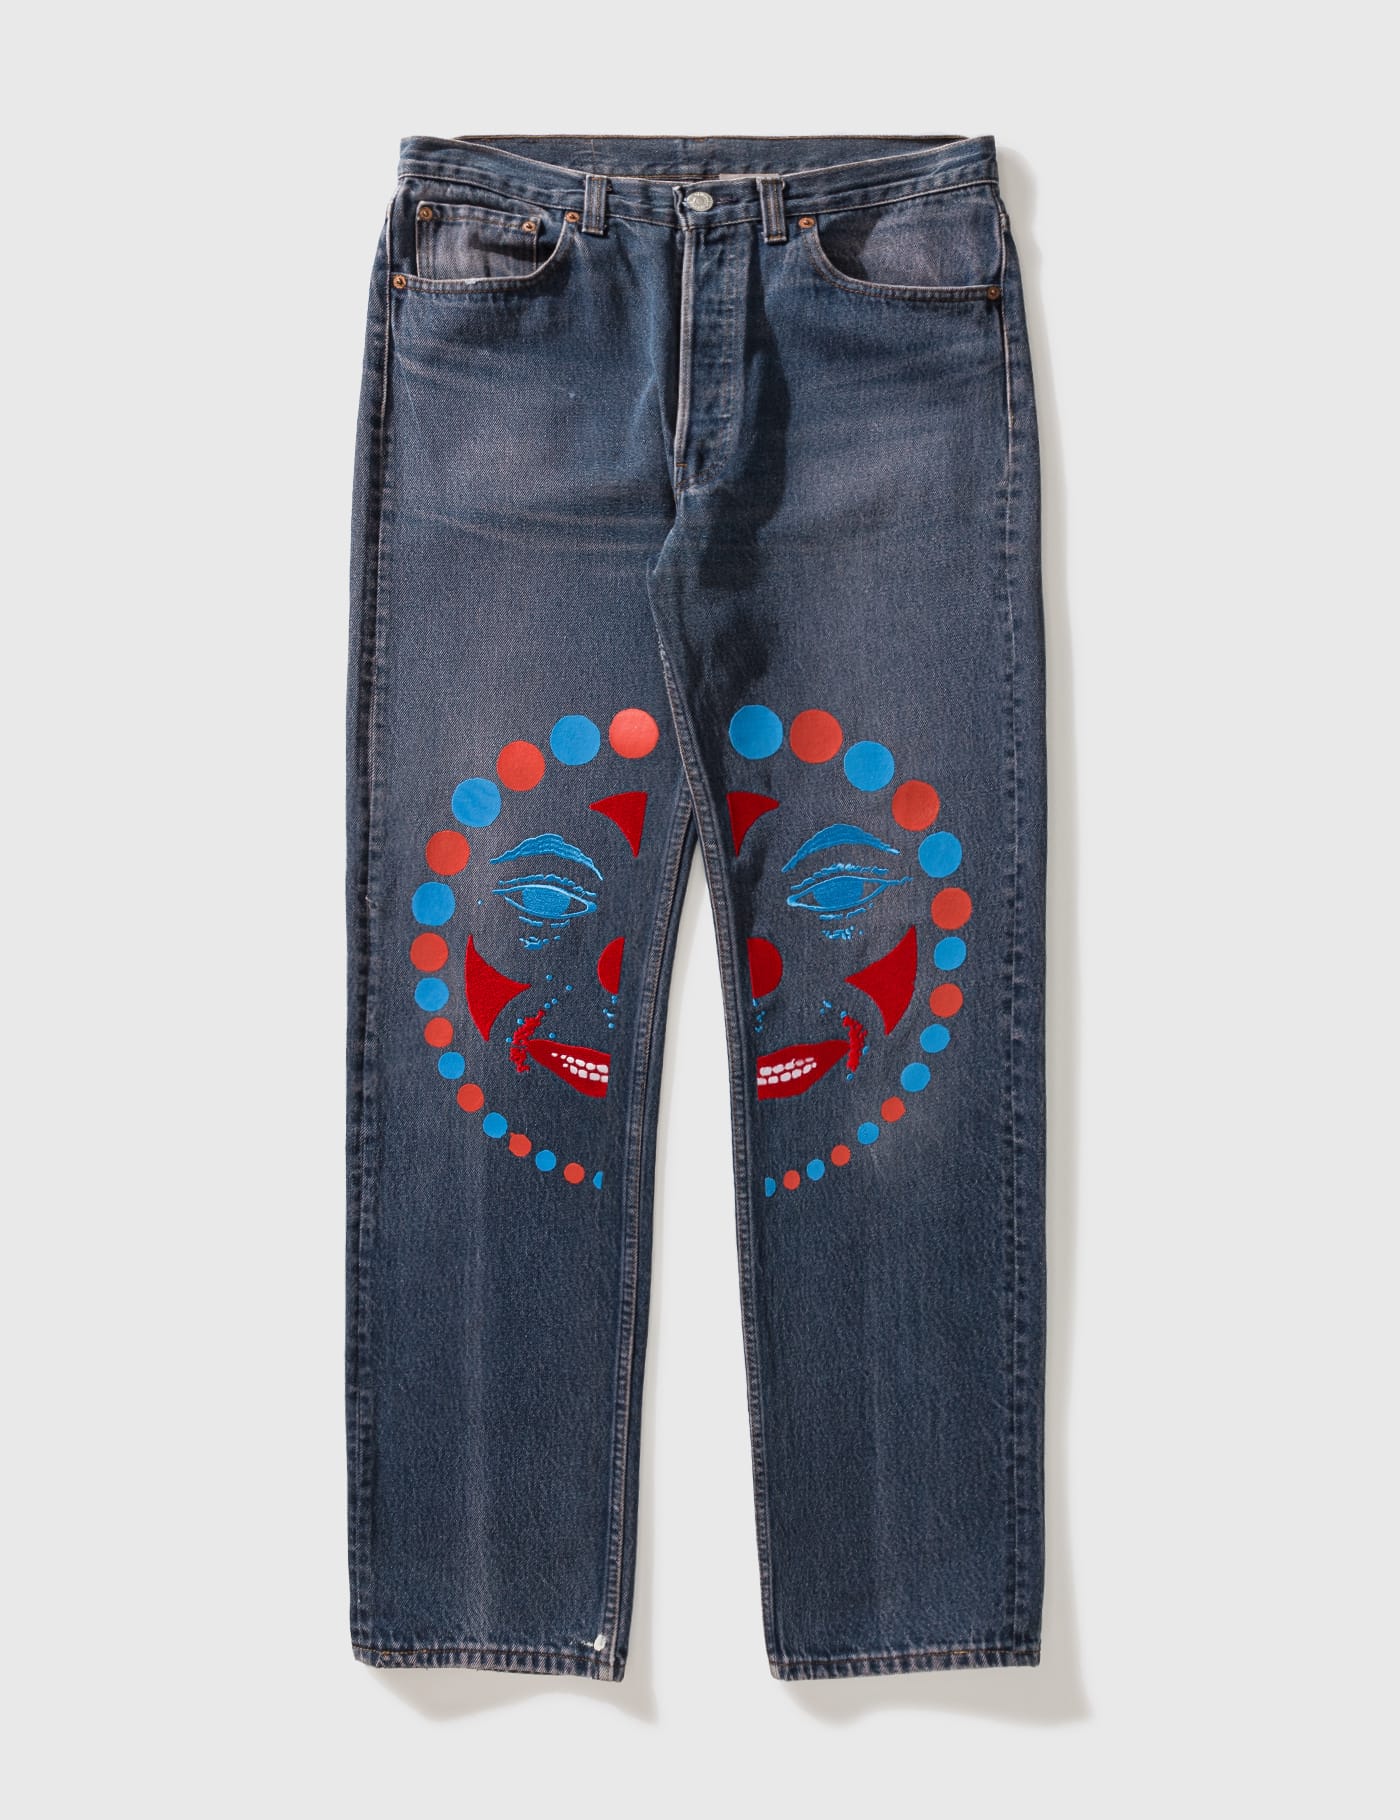 Perks and Mini - Clown Second Life Jeans | HBX - Globally Curated